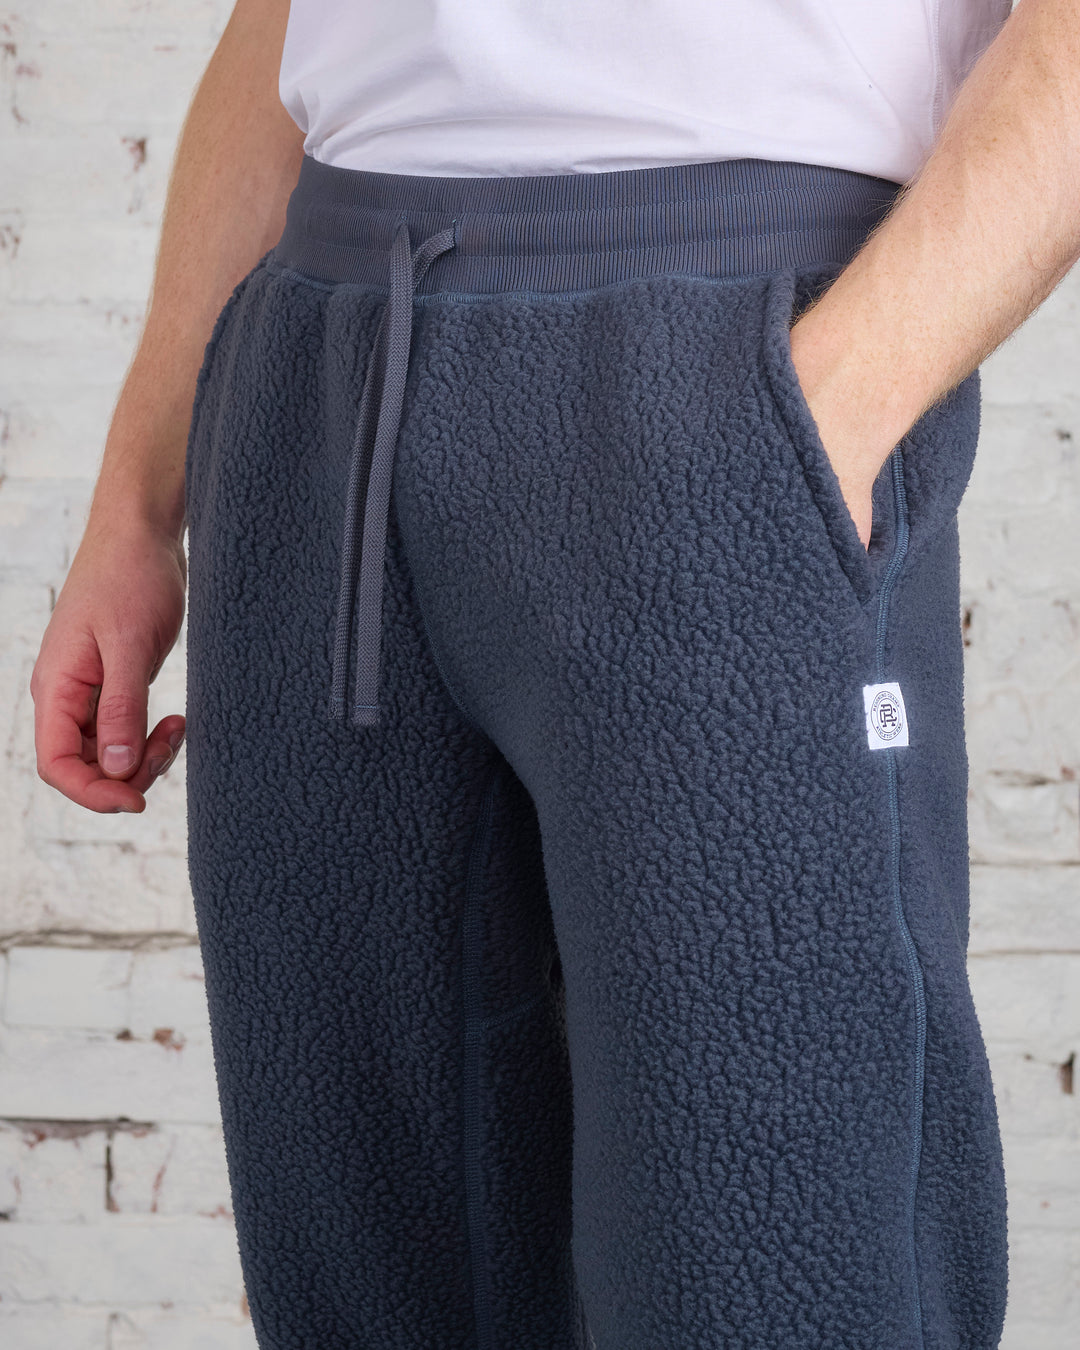 Reigning Champ Polartec Shearling Jogger Pant Midnight